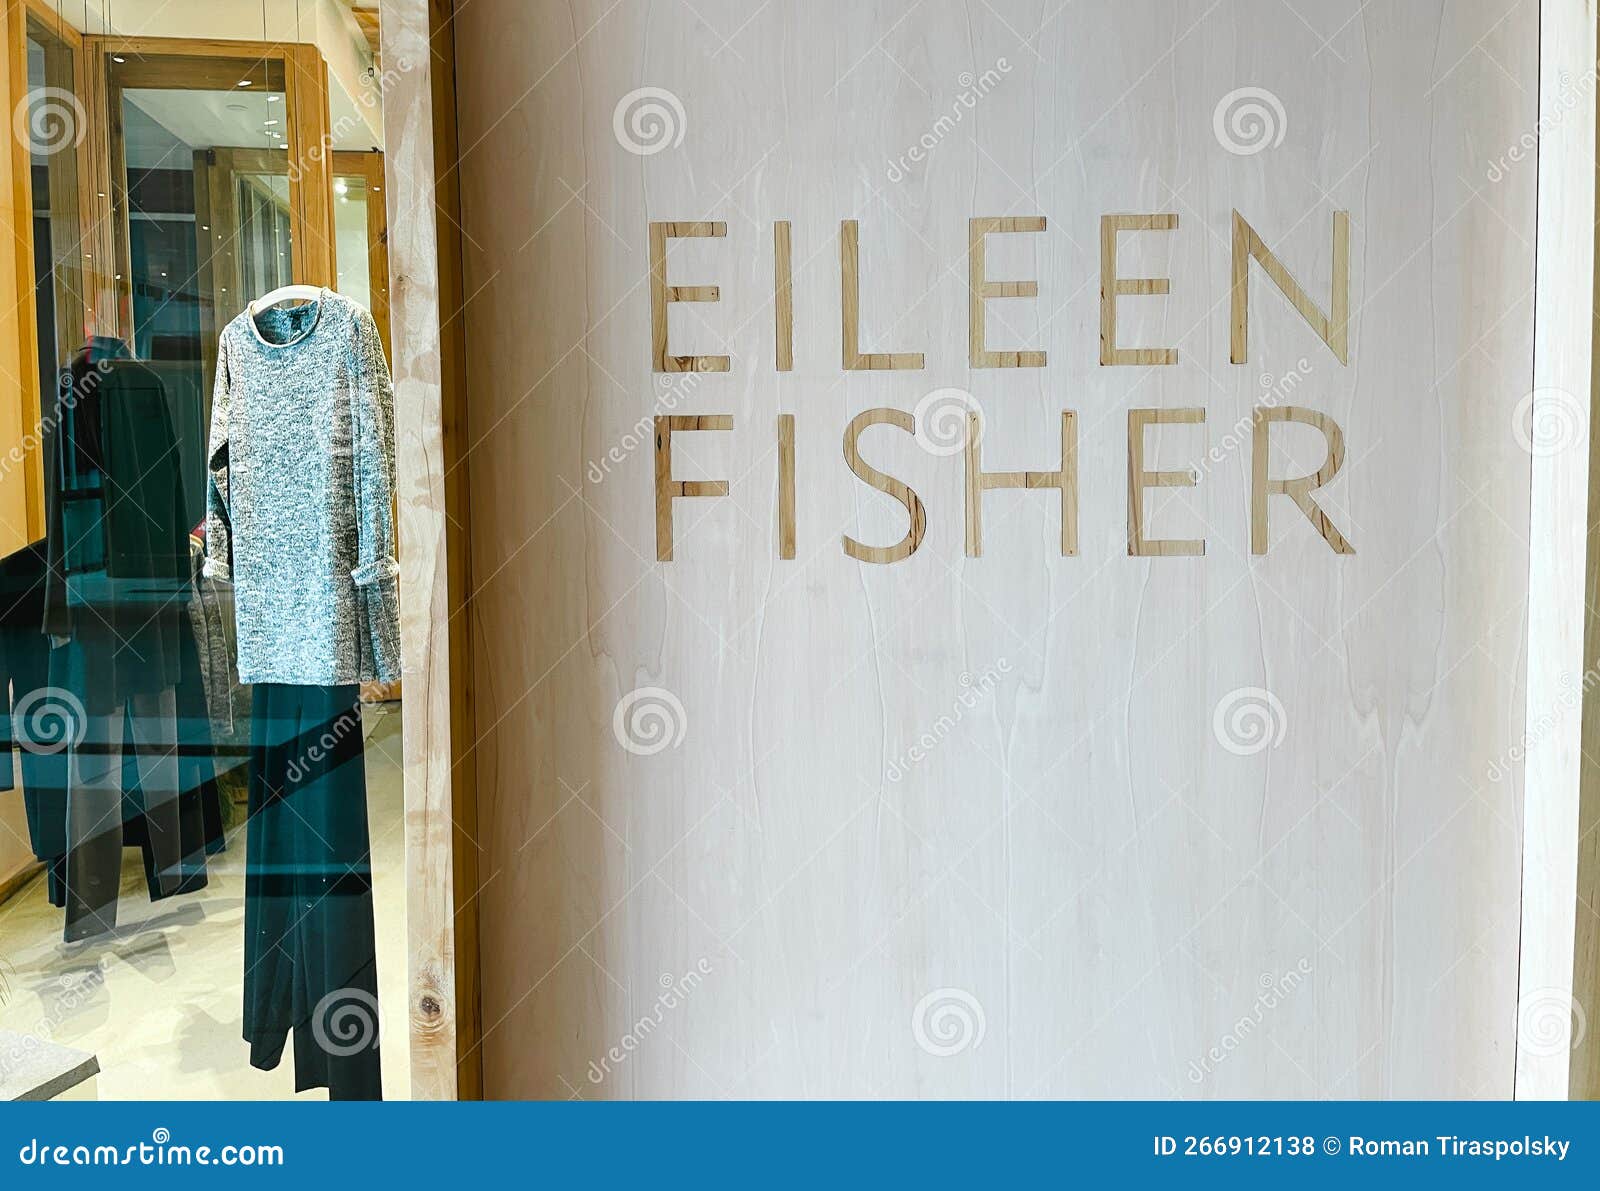 Eileen Fisher store editorial stock photo. Image of york - 266912138